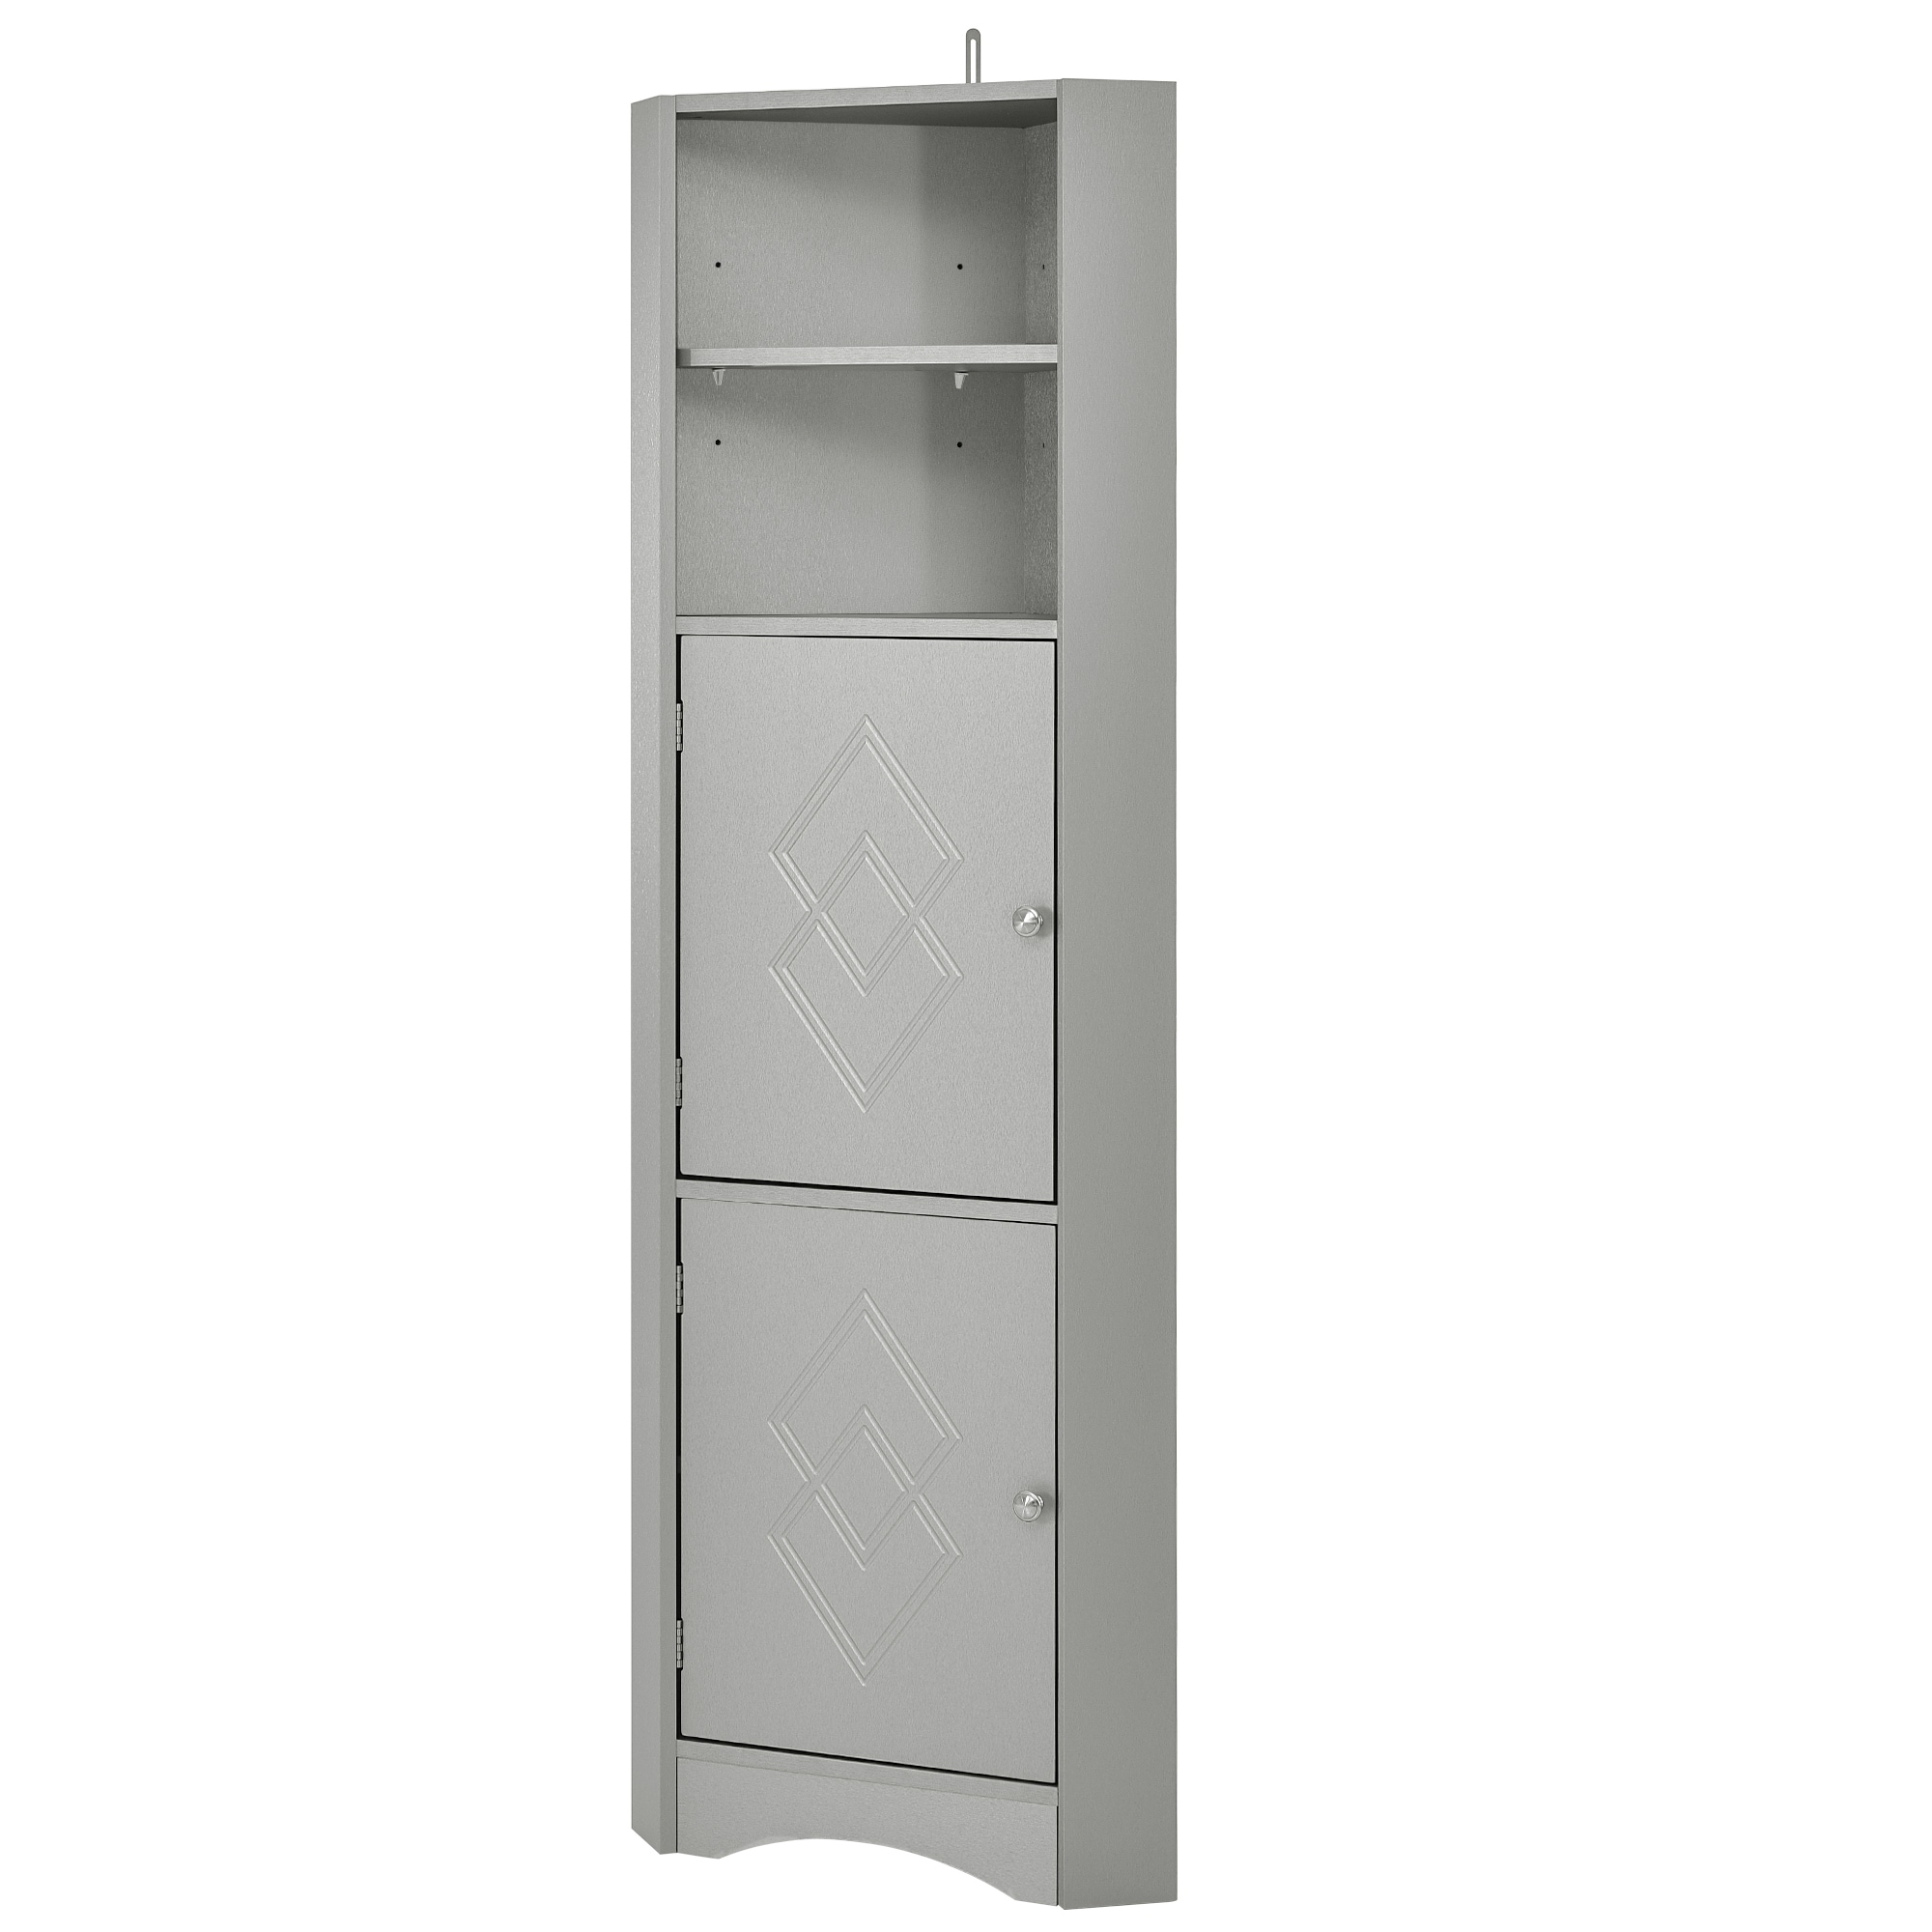 https://ak1.ostkcdn.com/images/products/is/images/direct/ddd47857420d923a73c8a048ae2540e90be93170/EYIW-Tall-Bathroom-Corner-Cabinet%2C-Freestanding-Storage-Cabinet-with-Doors-and-Adjustable-Shelves%2C-MDF-Board.jpg